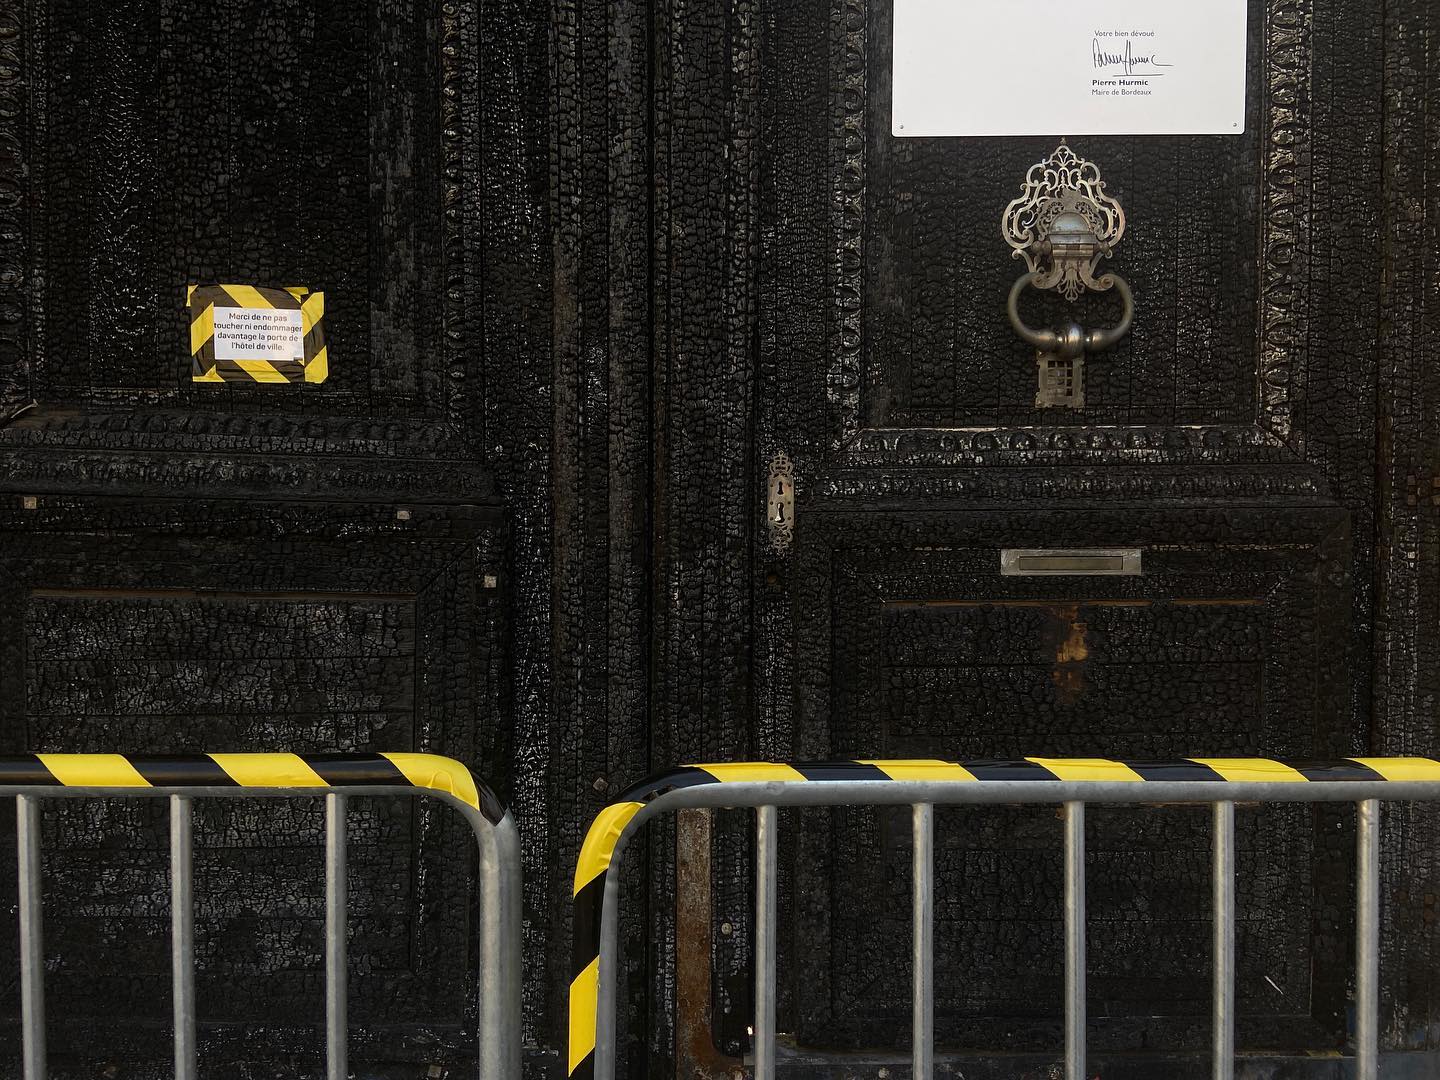 charred and blackened doors of bordeaux city hall. letter taped to the door with black and yellow hazard tape on railings in front